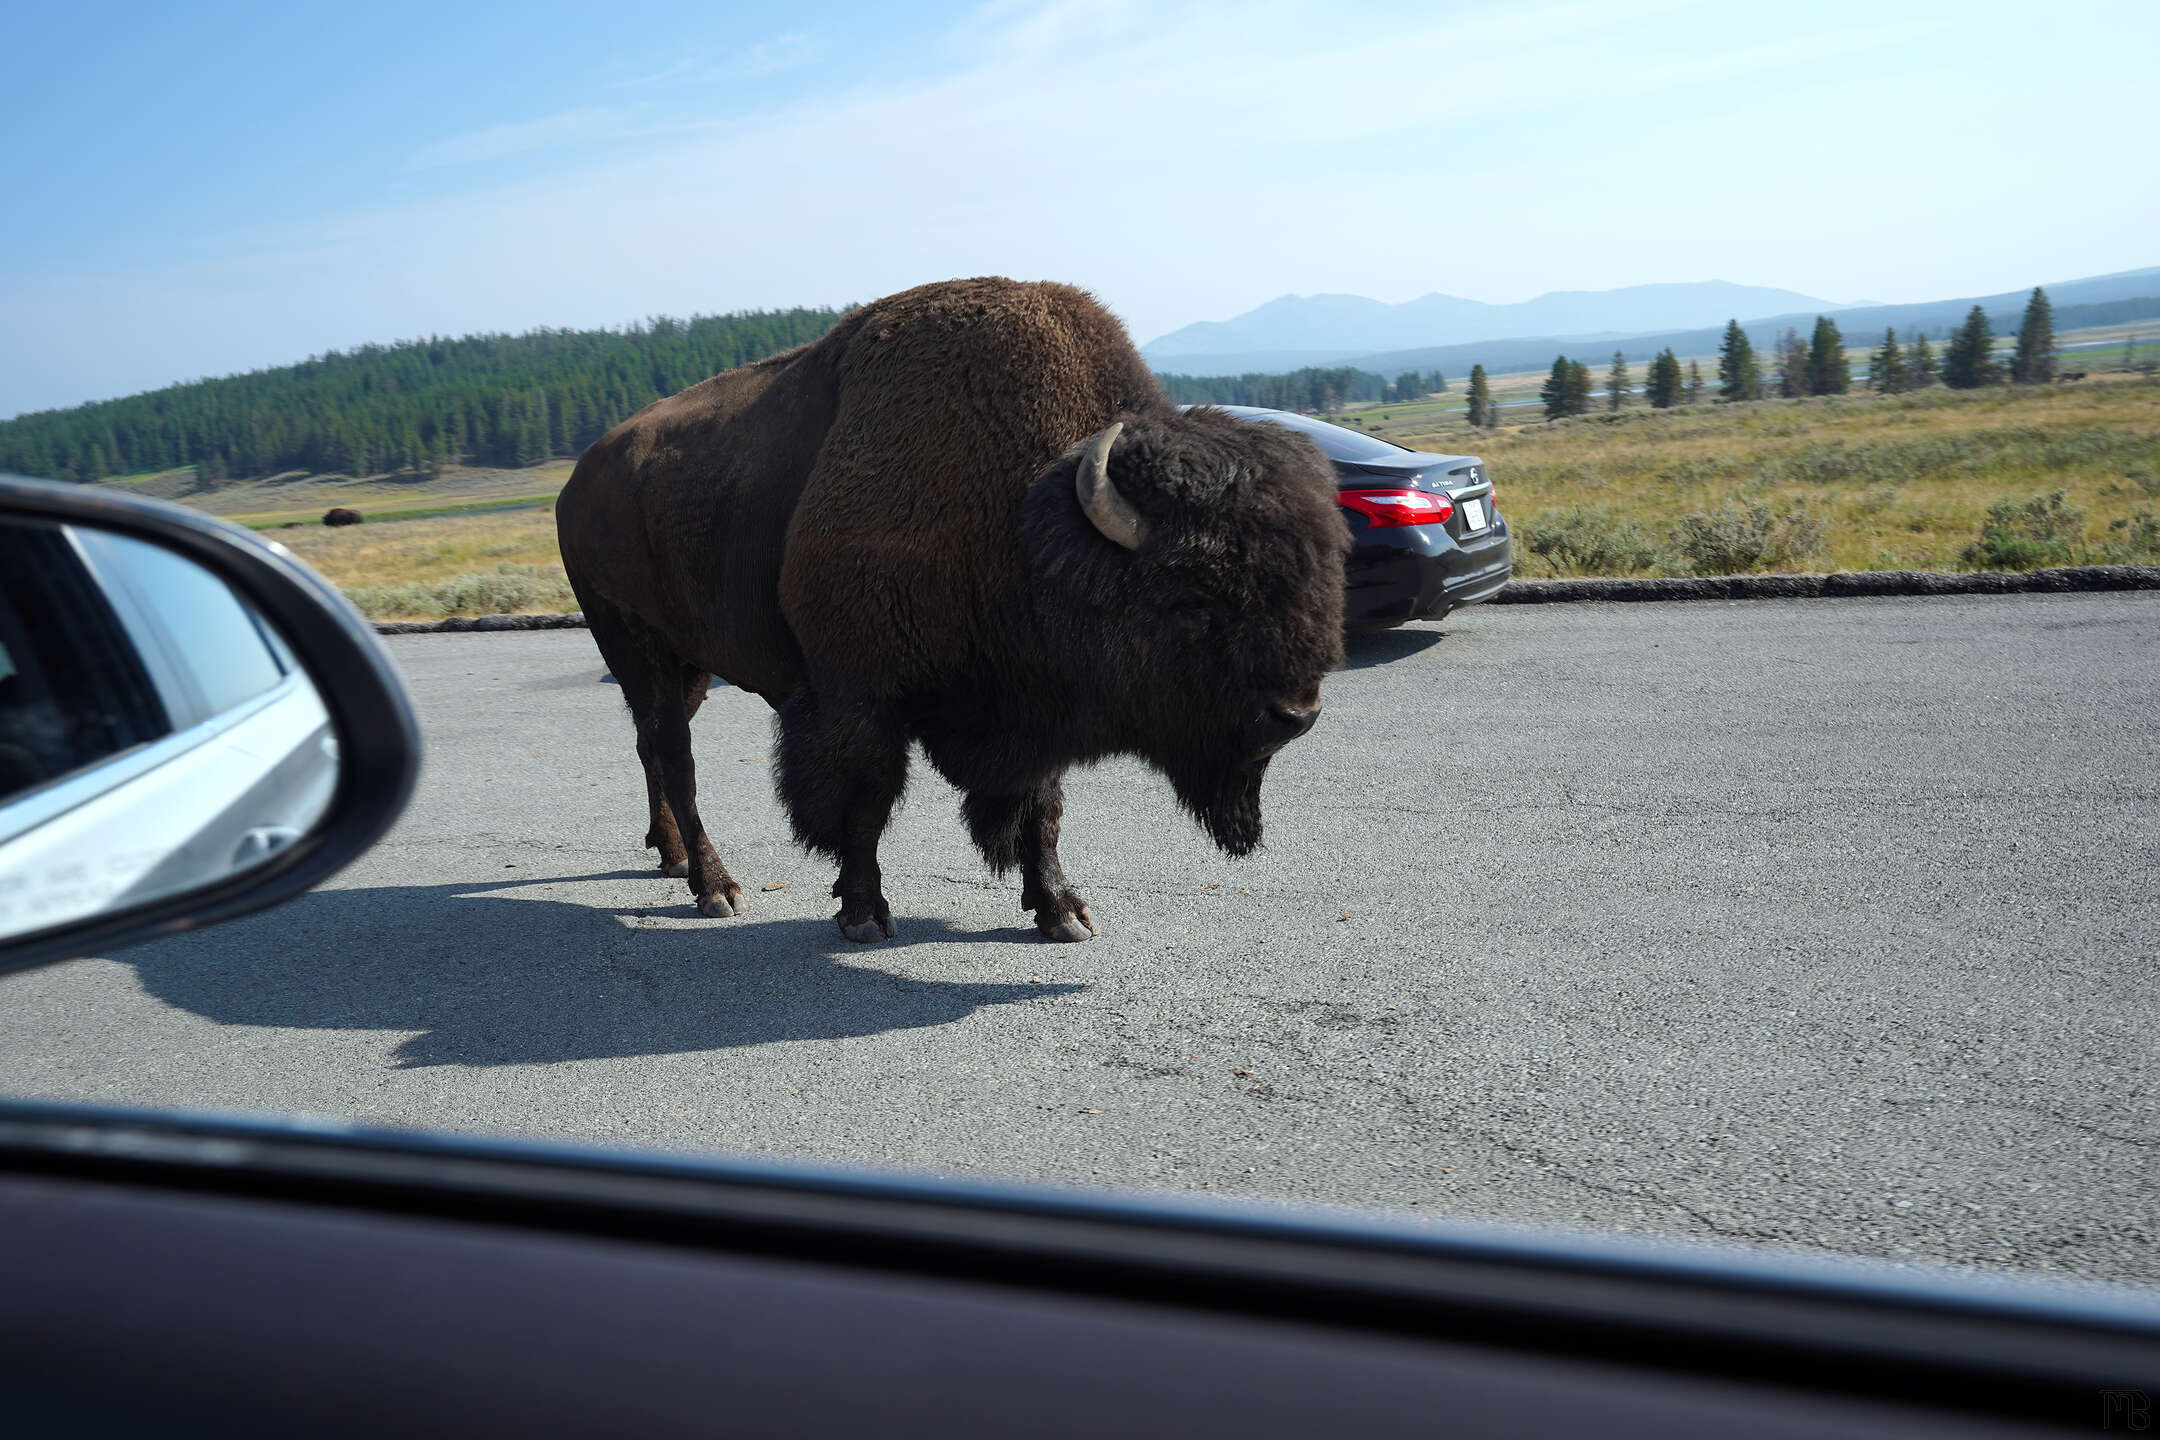 Bison in the road